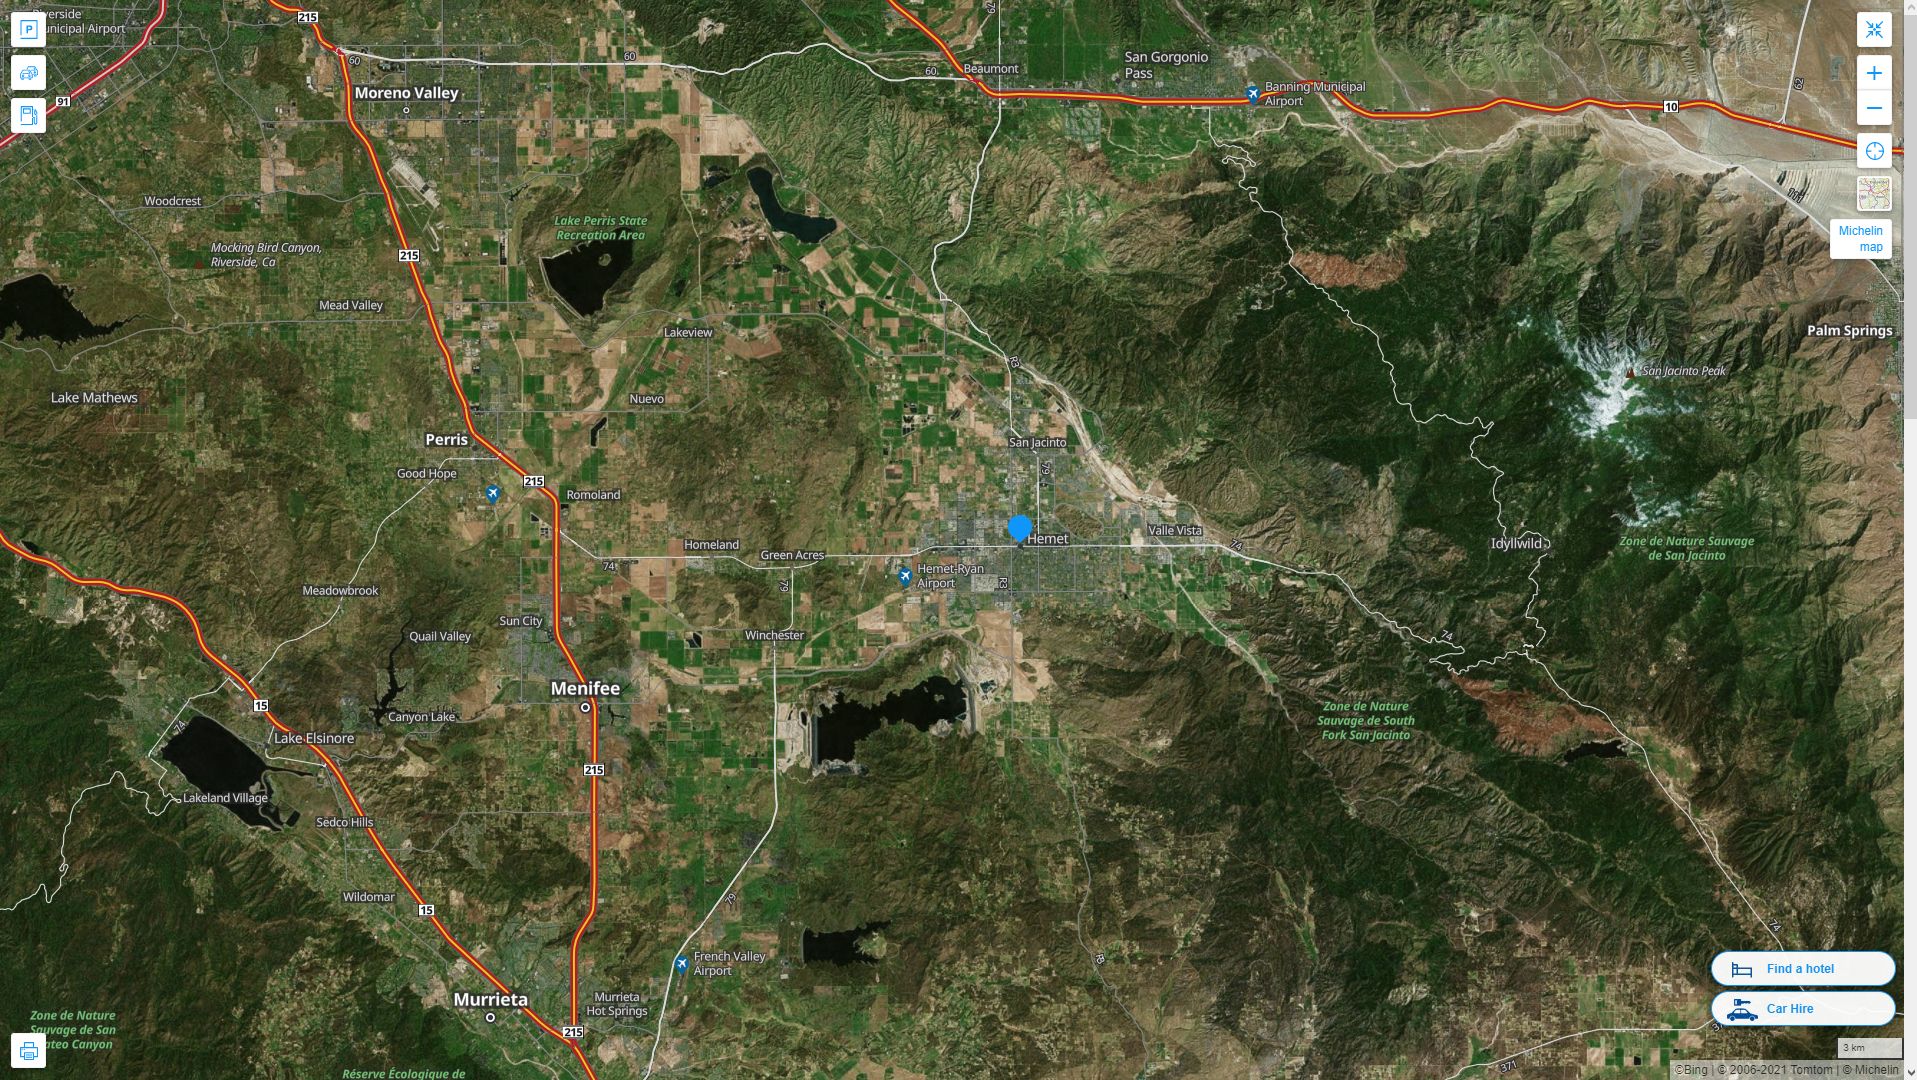 Hemet California Highway and Road Map with Satellite View